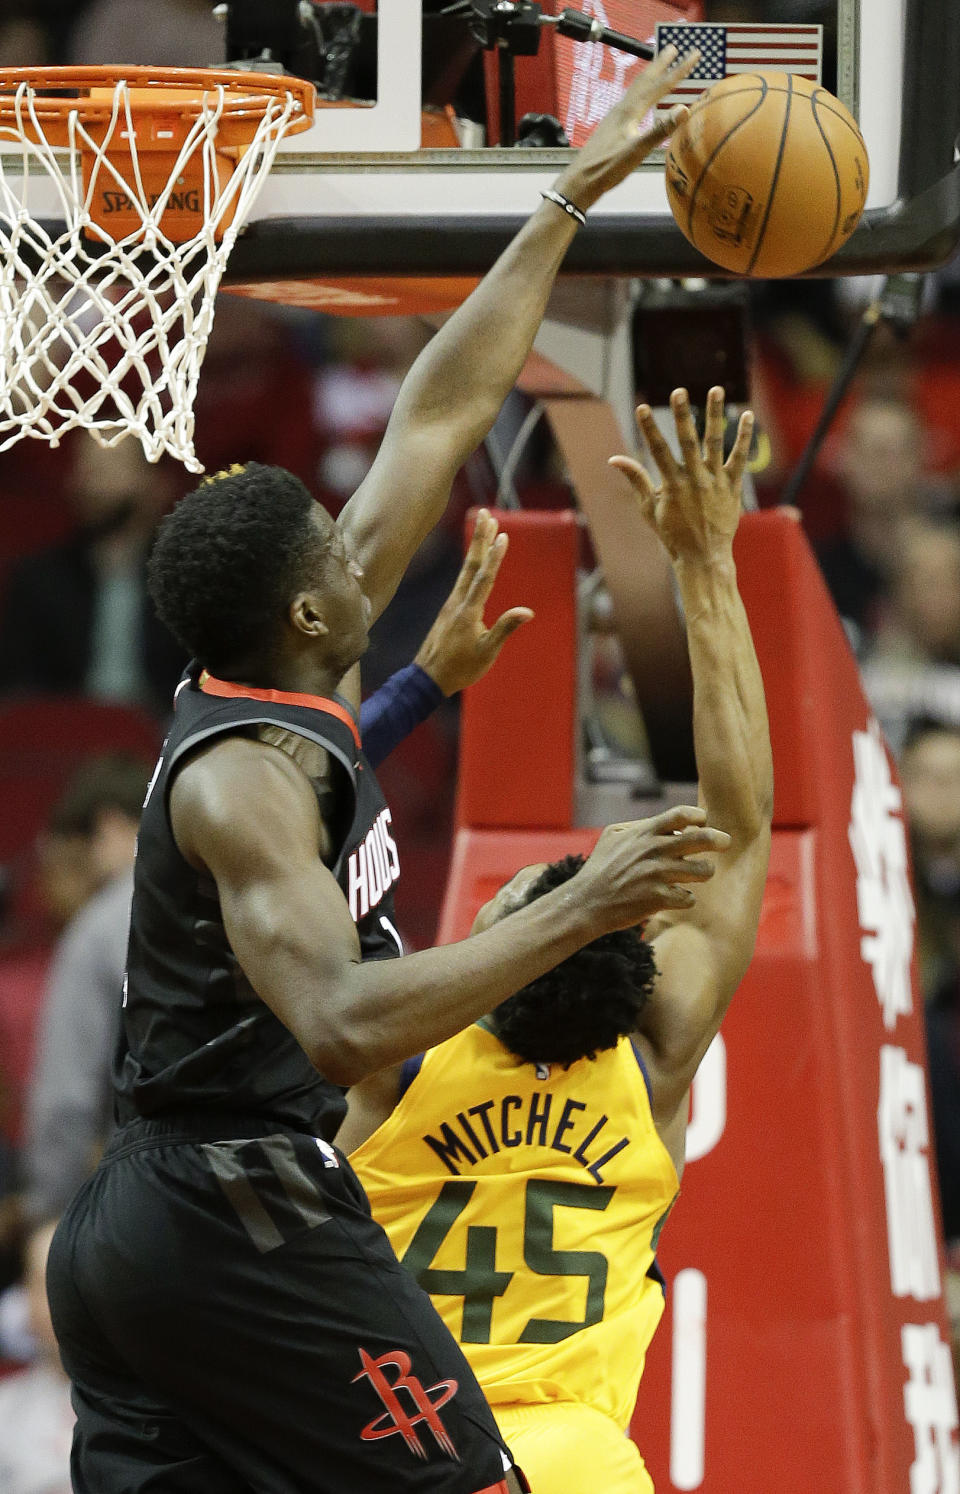 Houston Rockets center Clint Capela, left, blocks the shot of Utah Jazz guard Donovan Mitchell during the first half of an NBA basketball game, Monday, Dec. 17, 2018, in Houston. (AP Photo/Eric Christian Smith)